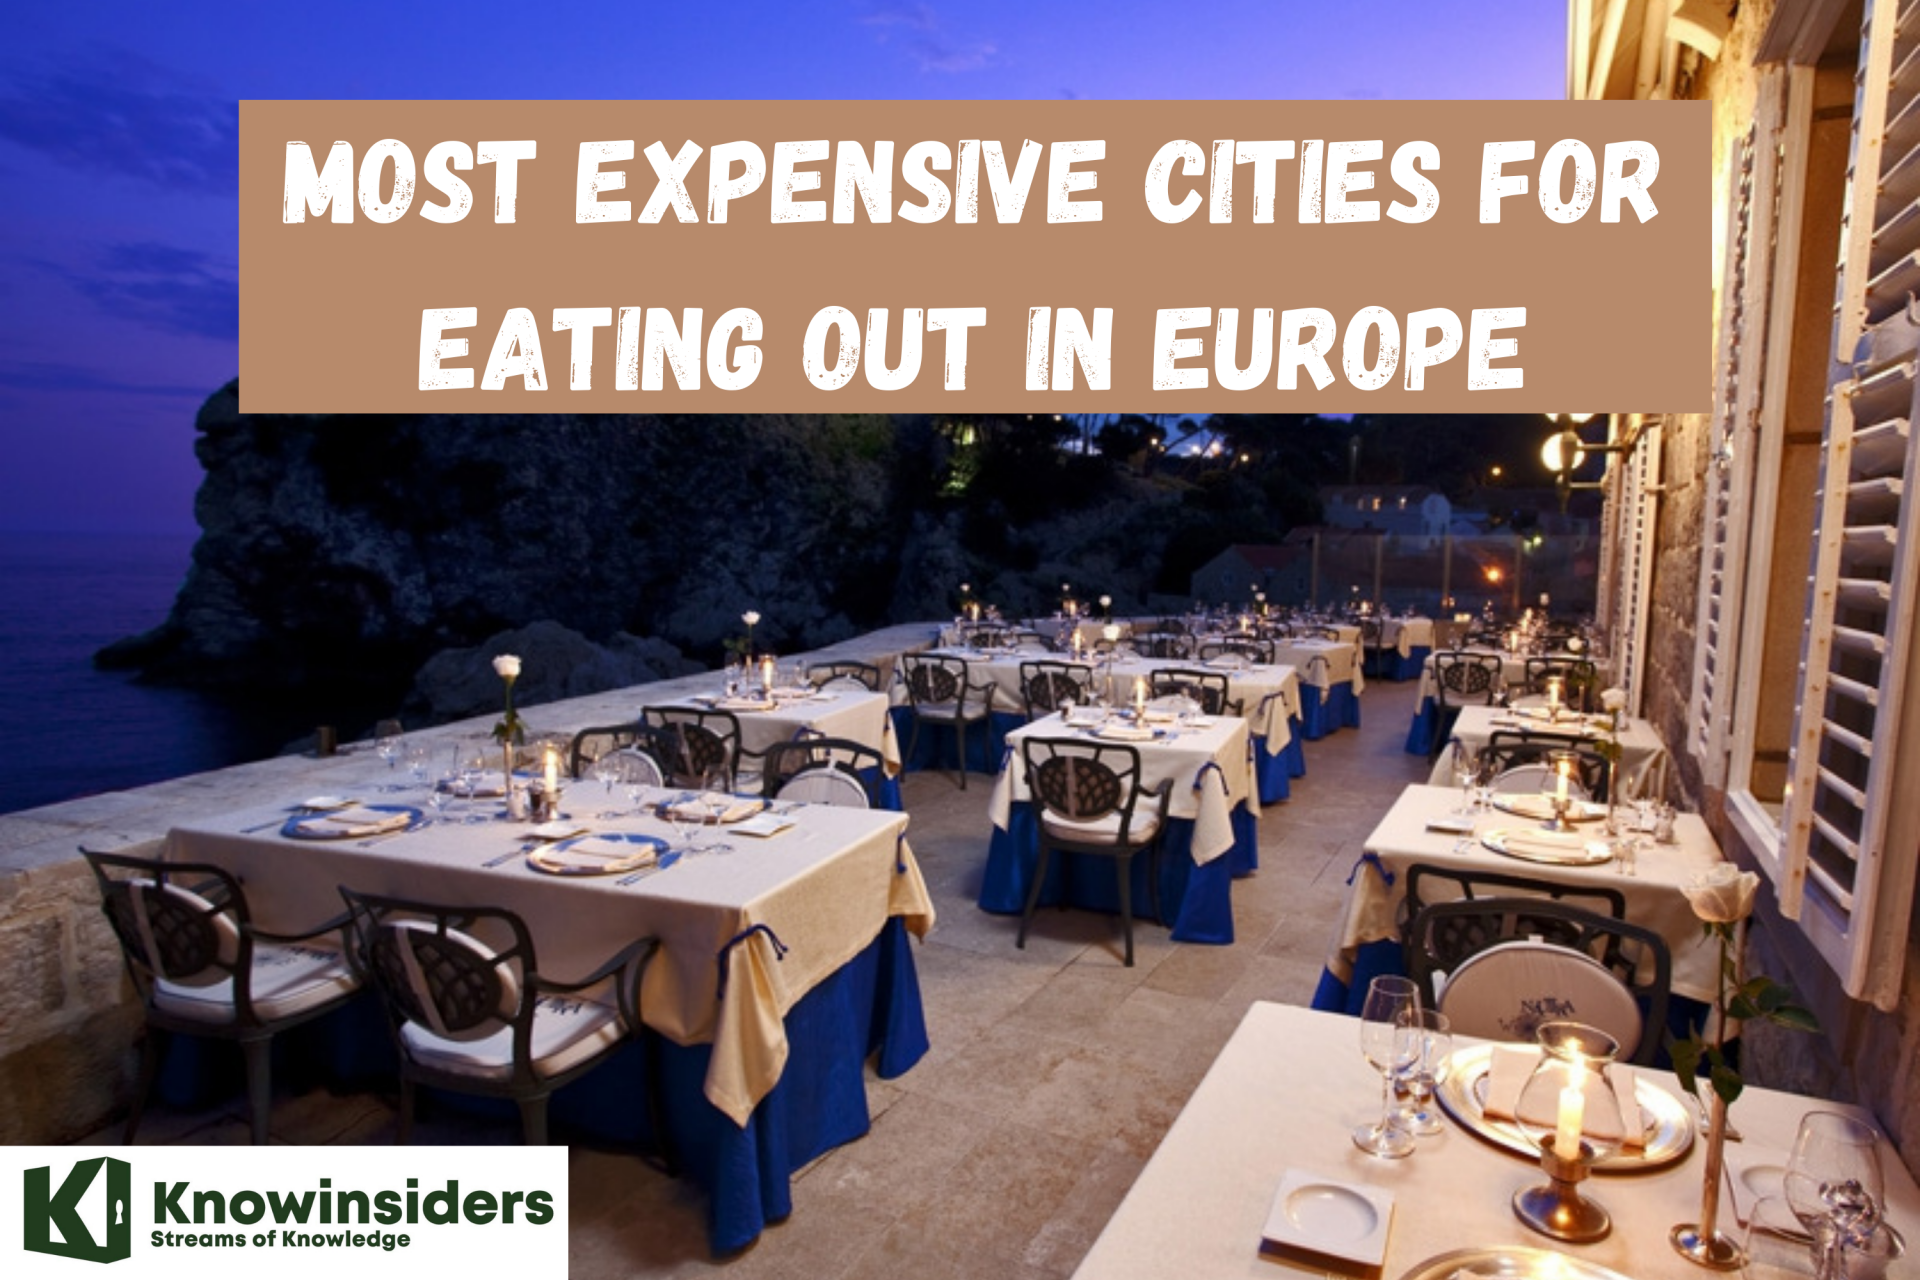 Top 10 Most Expensive Cities For Eating Out In Europe